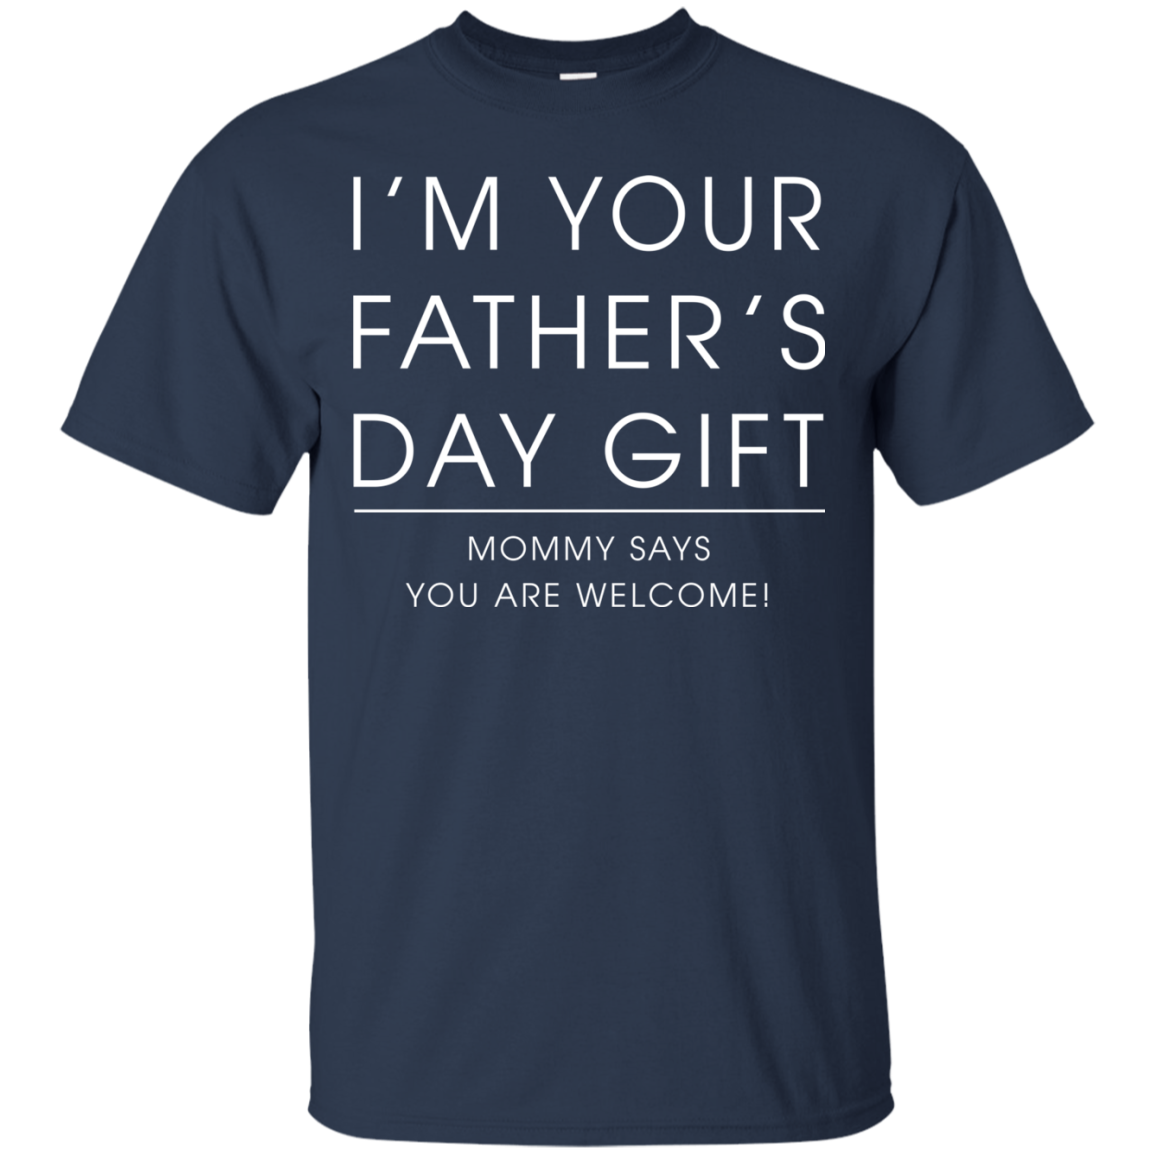 I'm Your Father's Day Gift - Mommy Says You Are Welcome Shirt